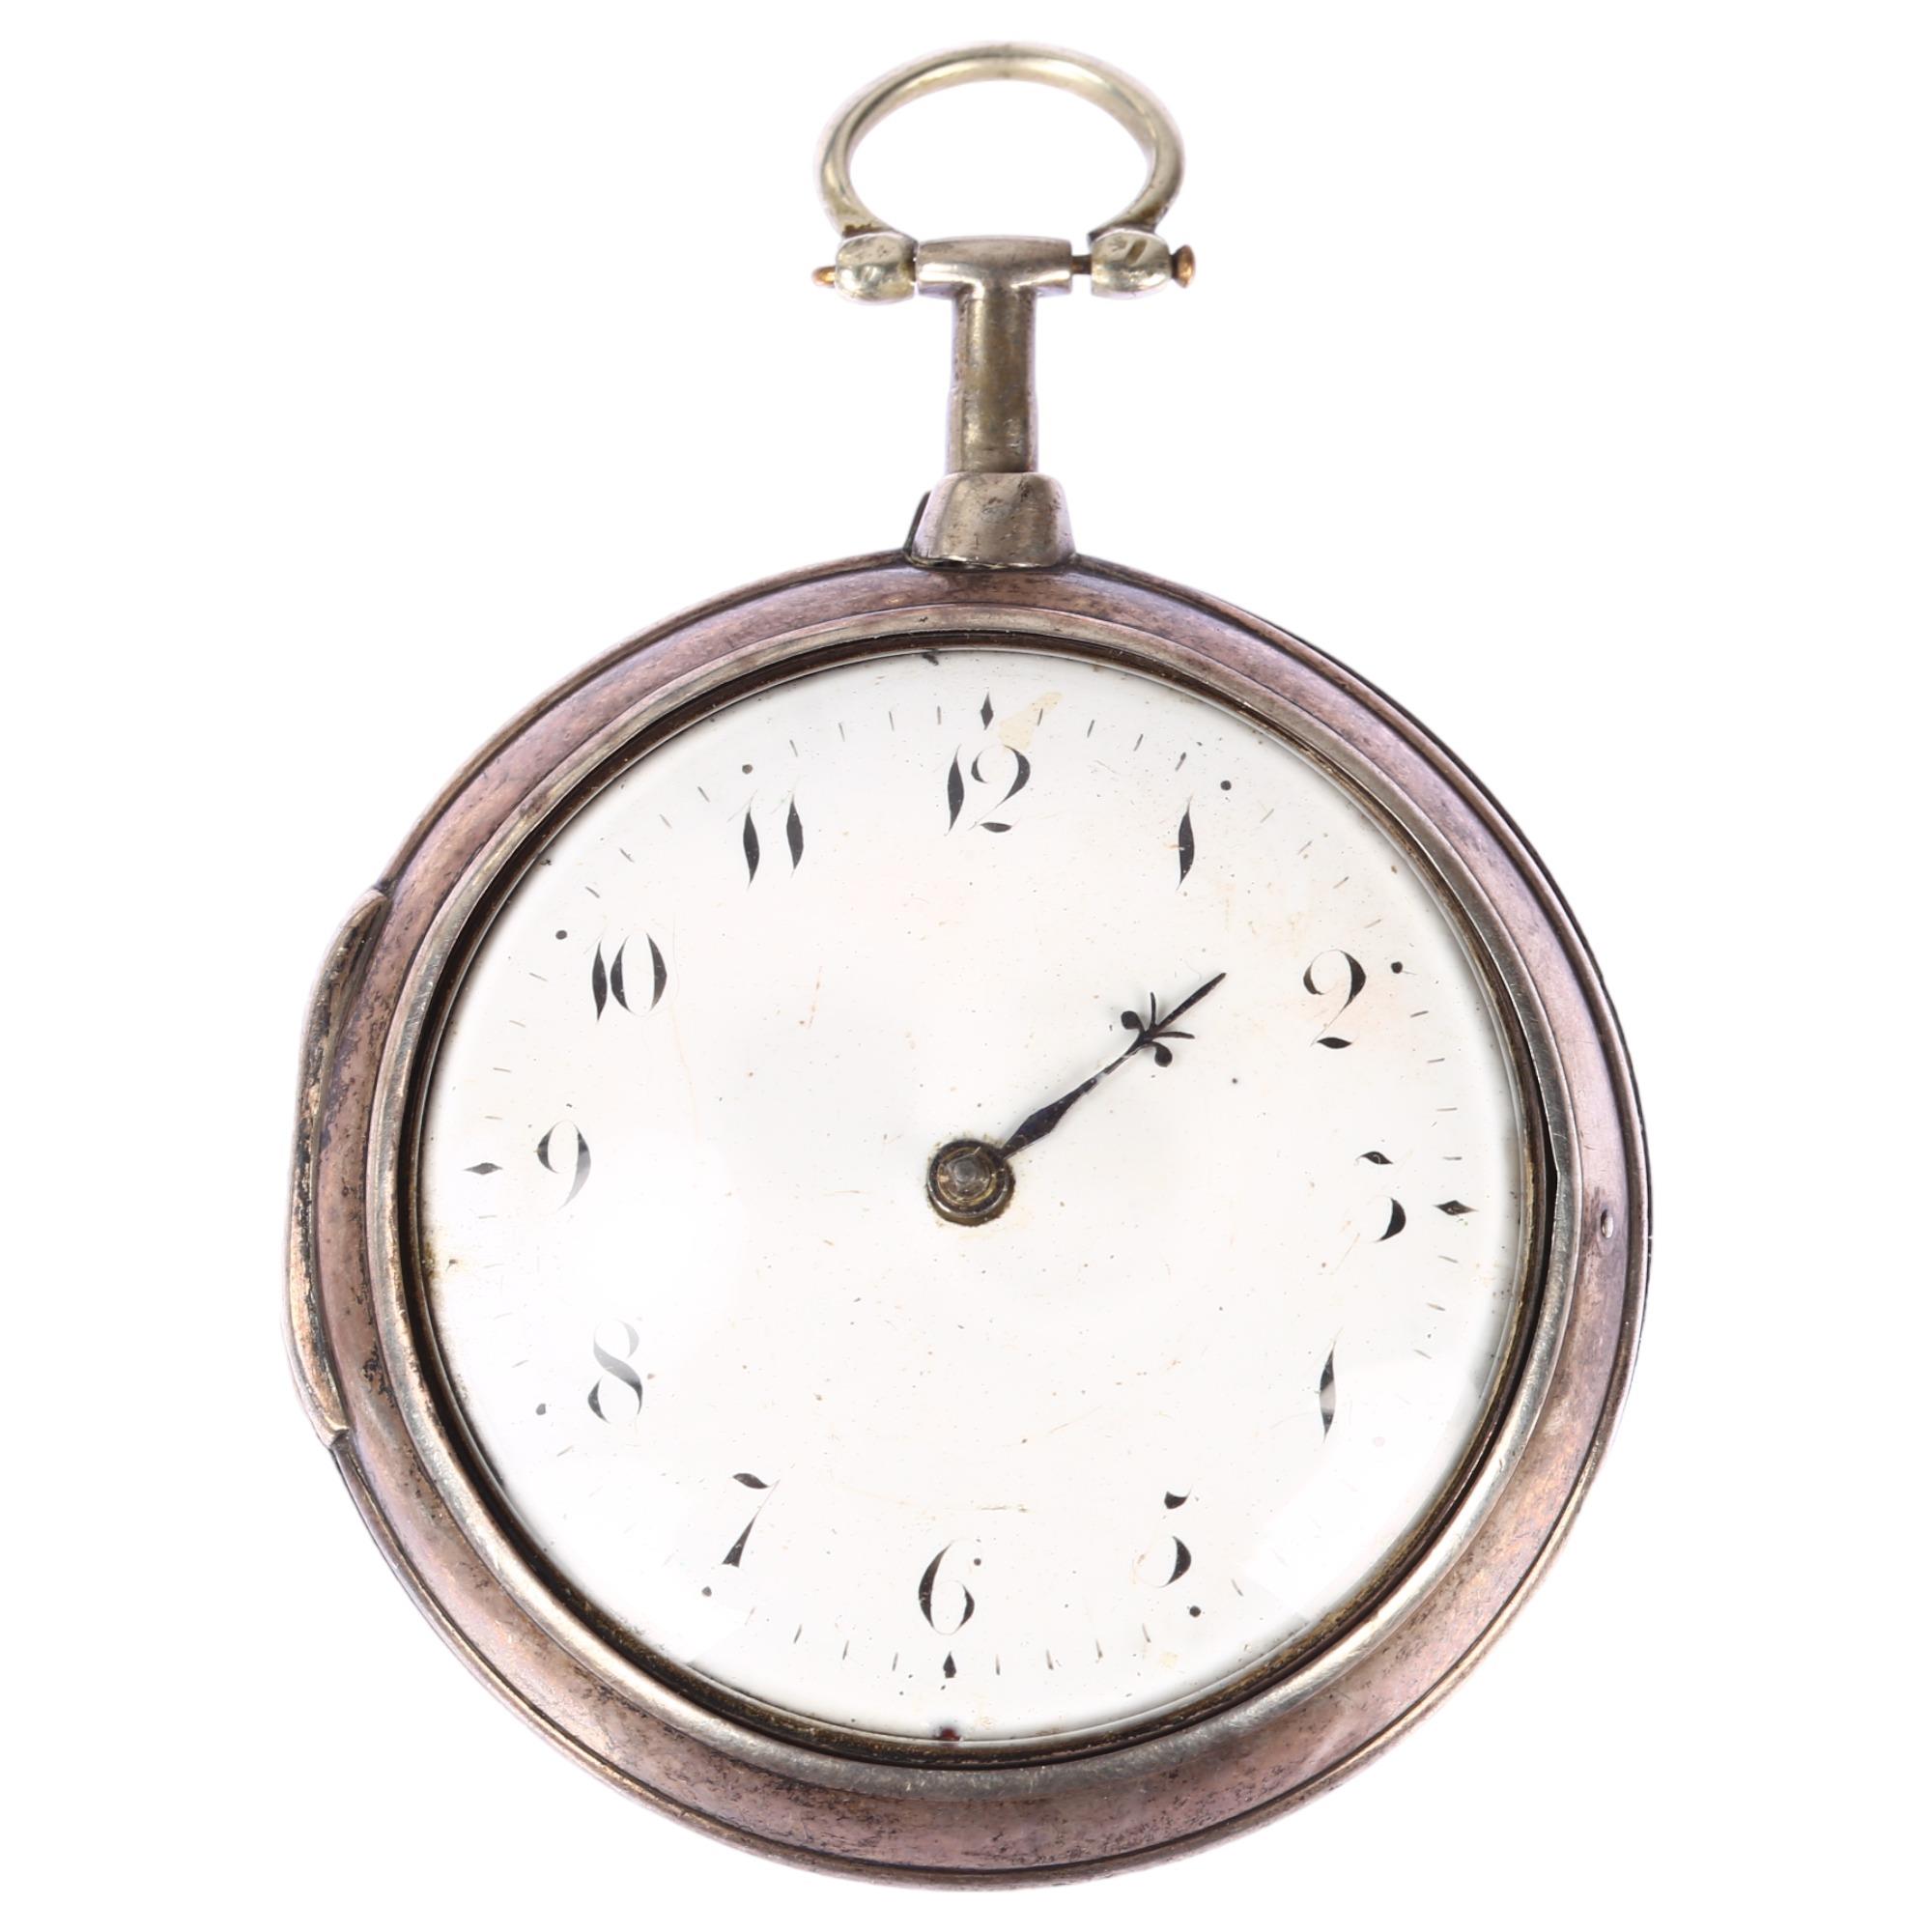 An early 19th century silver pair-cased open-face key-wind verge pocket watch, by James Hopewell